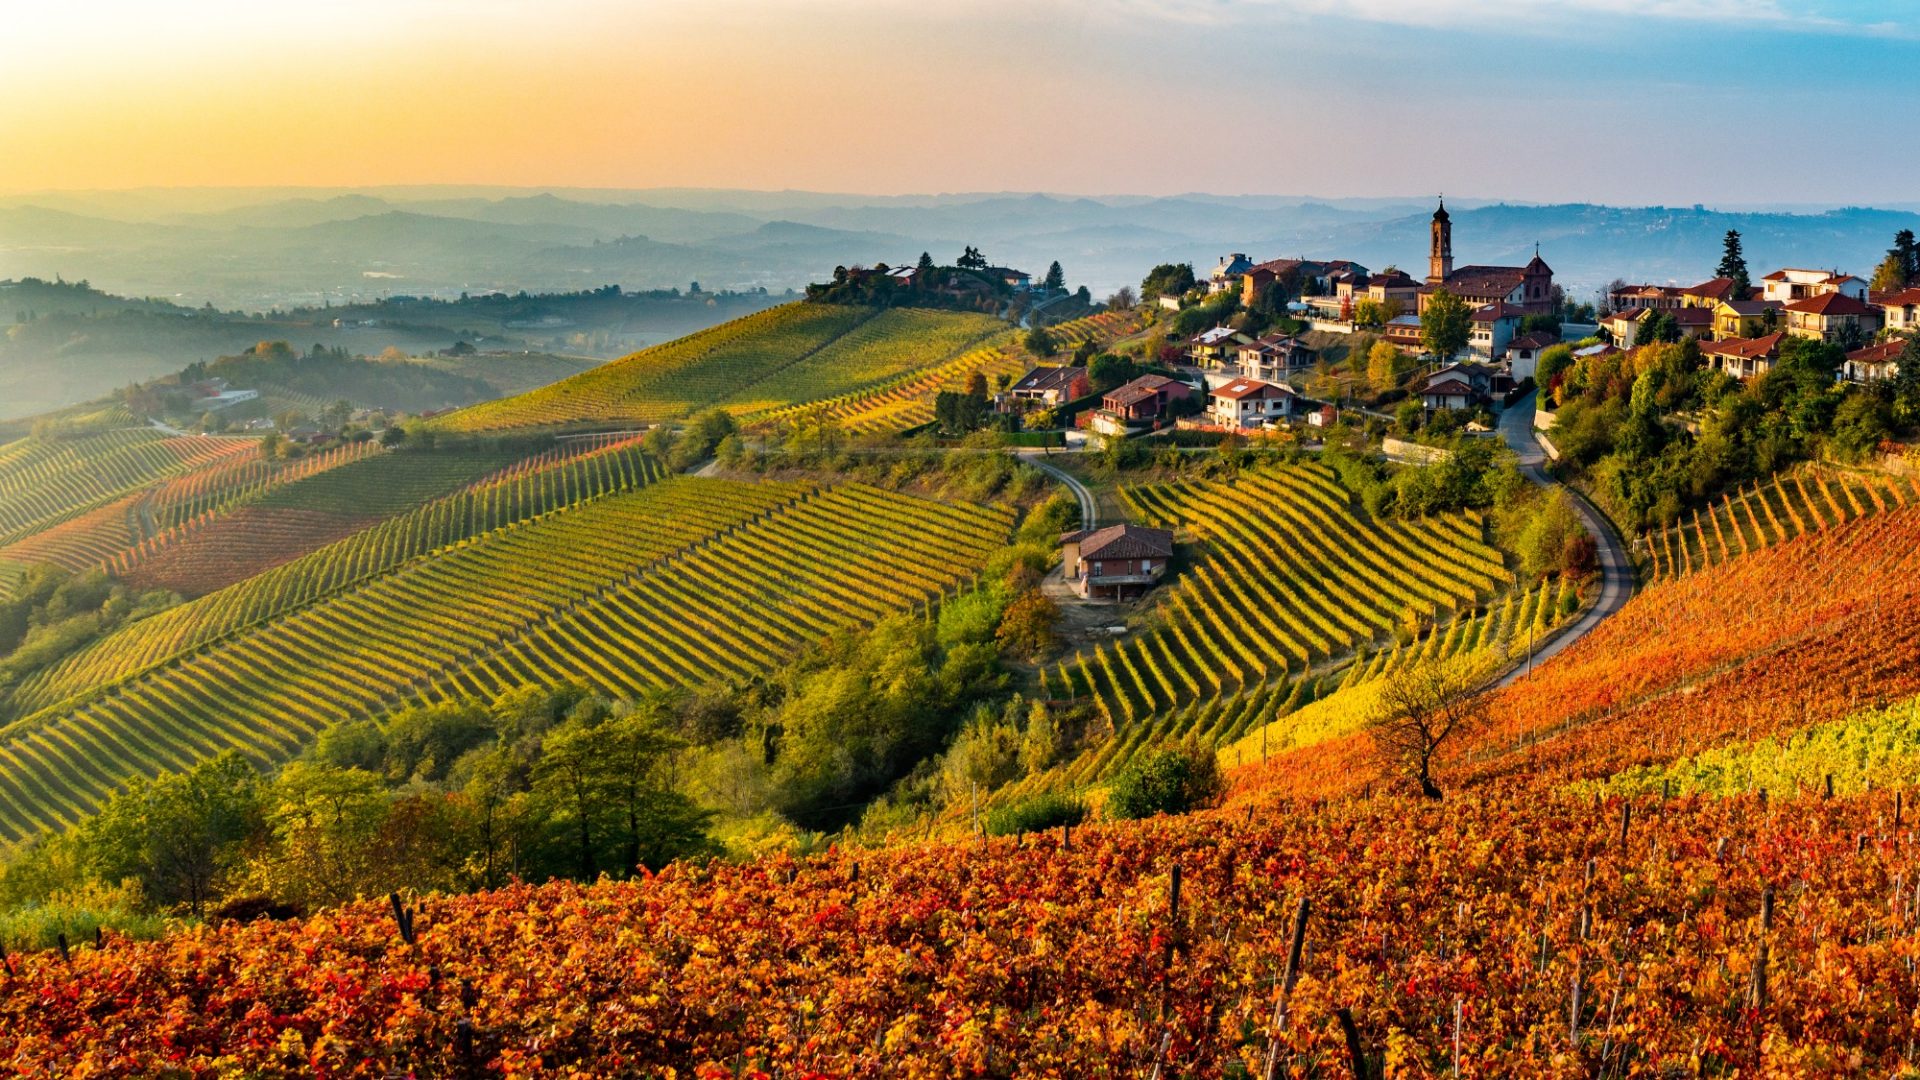 The Vineyards of Langhe